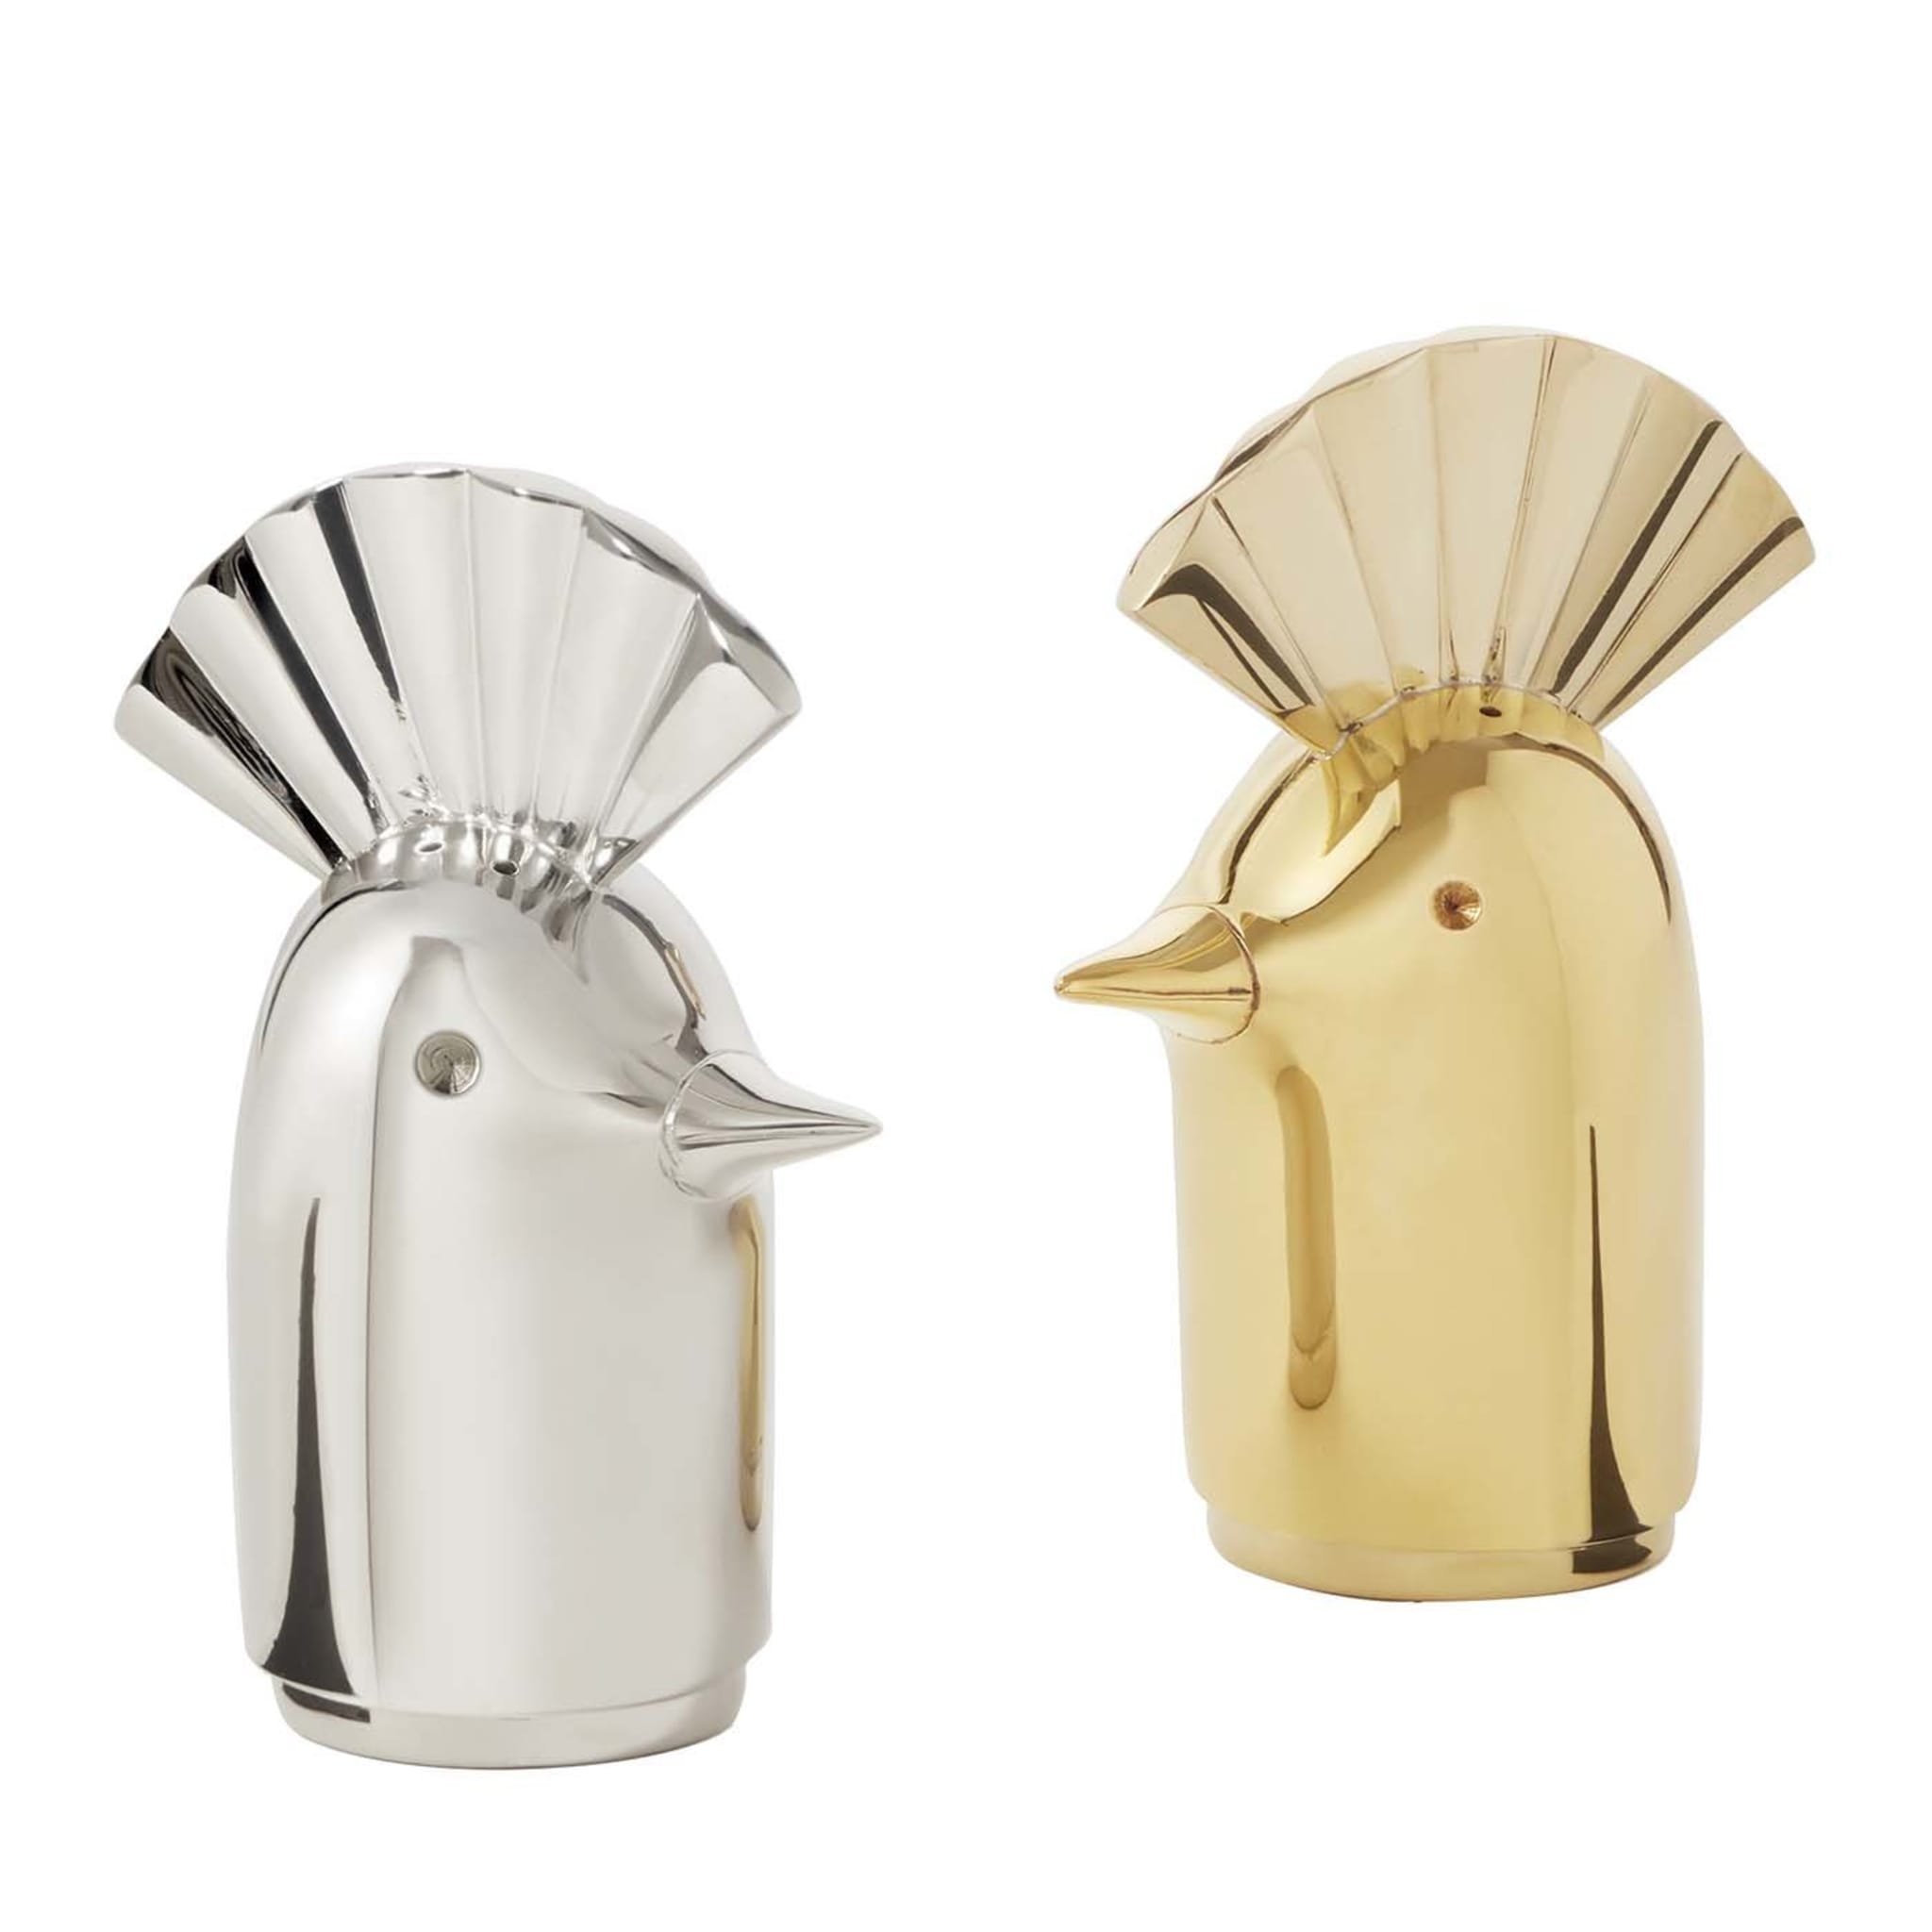 Punki Salt and Pepper Shakers by Jaime Hayon - Main view